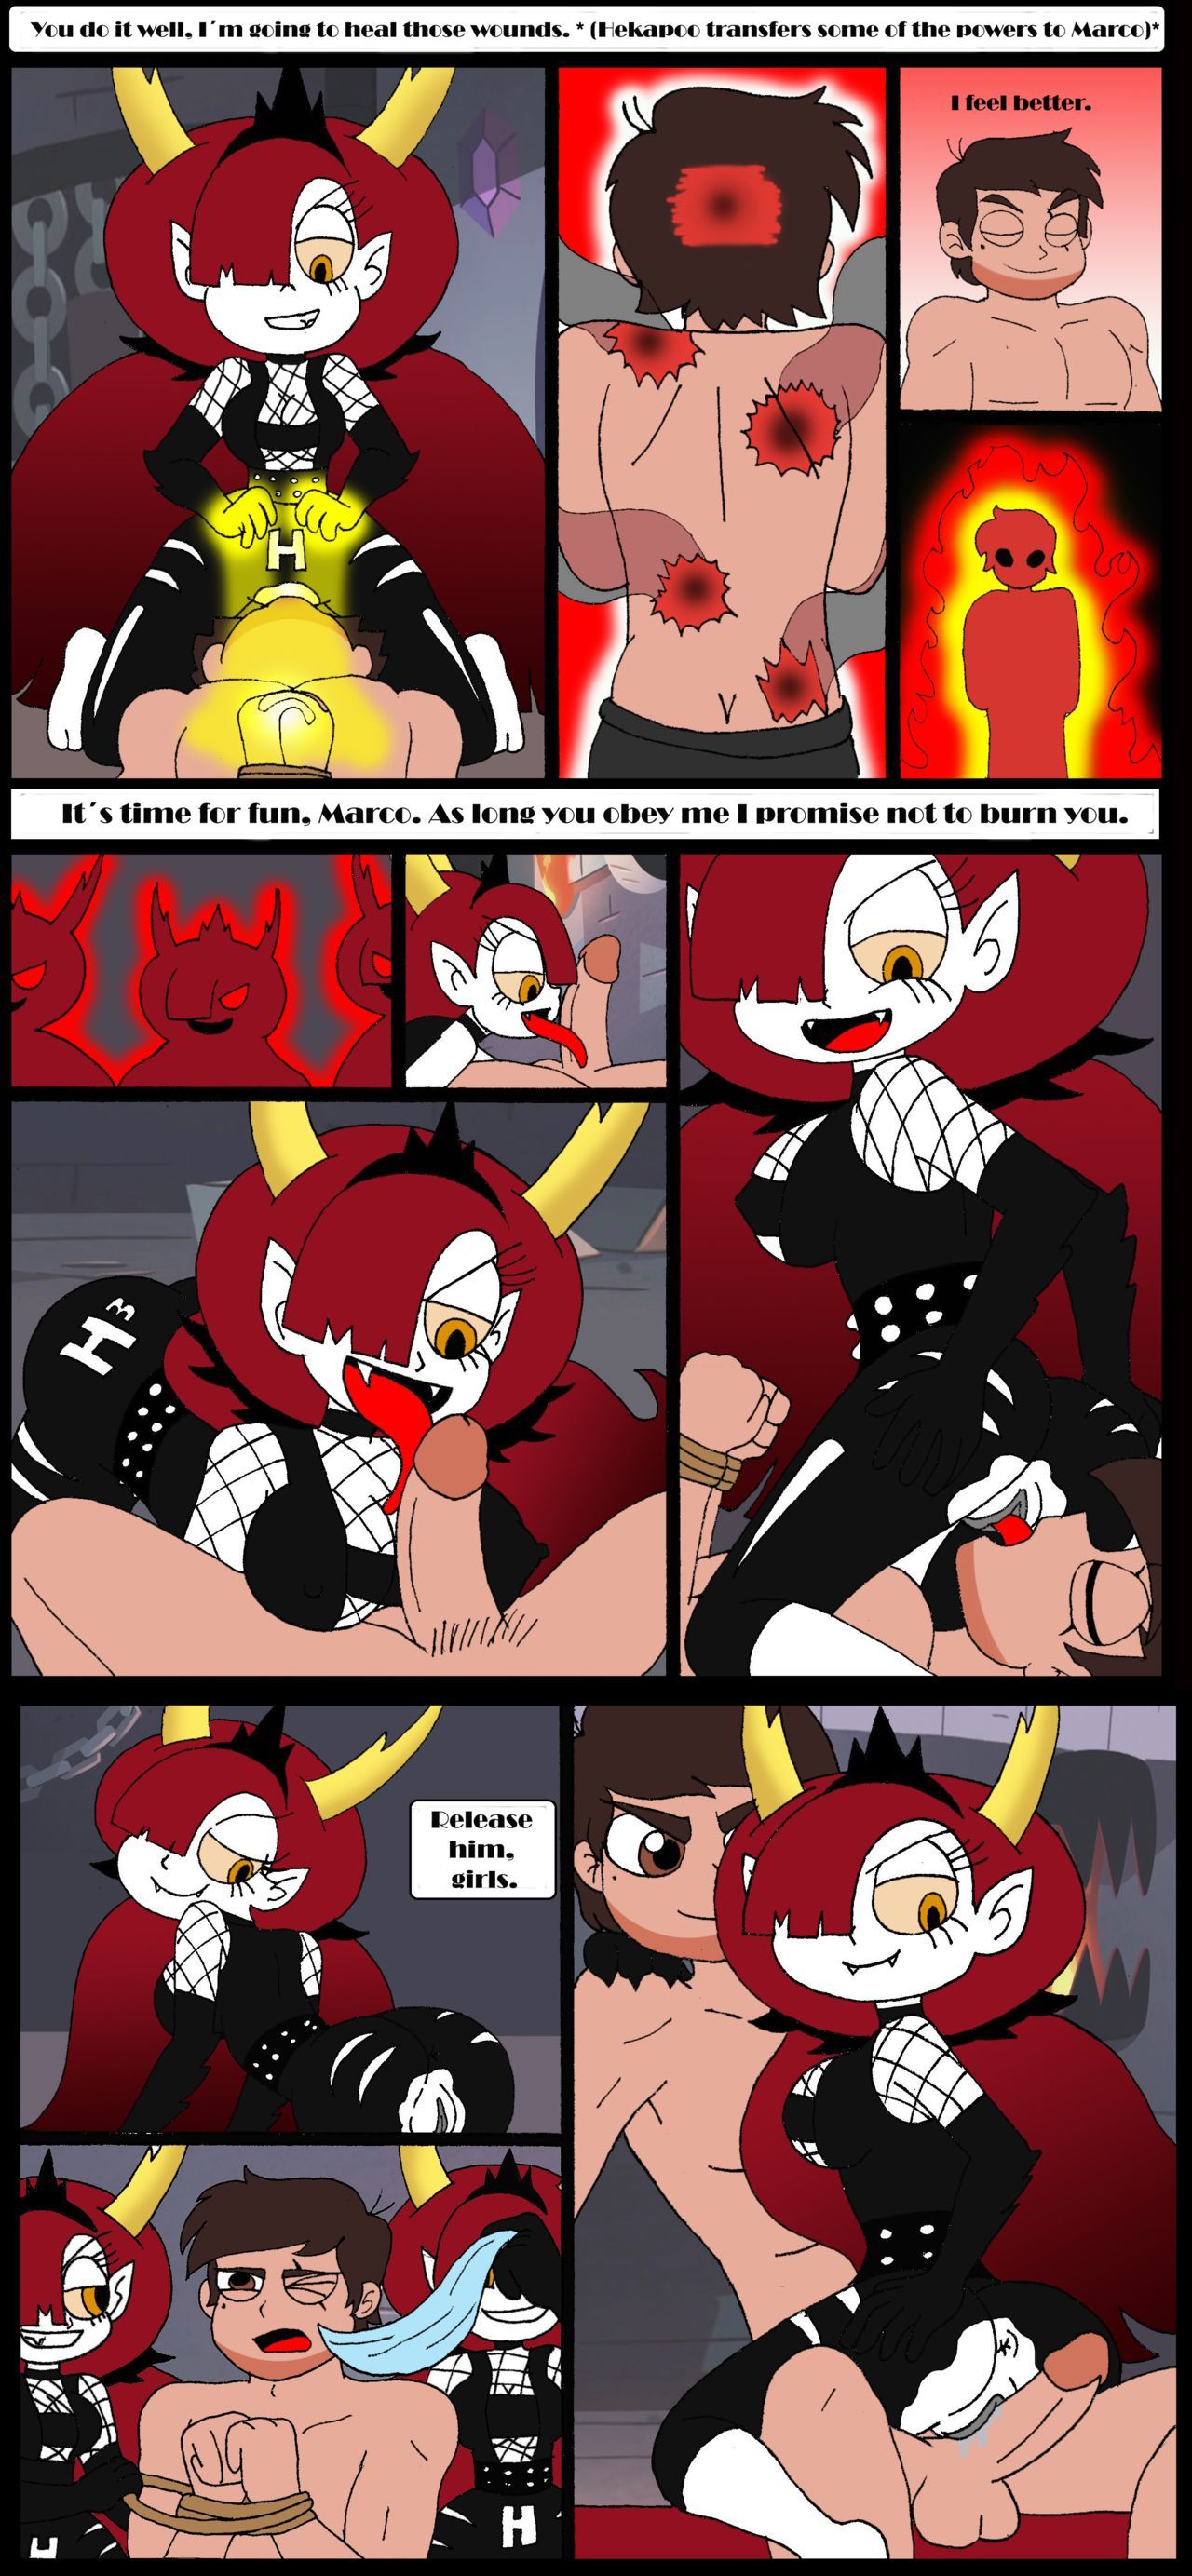 Playing with Fire (Star vs. the Forces of Evil) by Ferozyraptor page 22